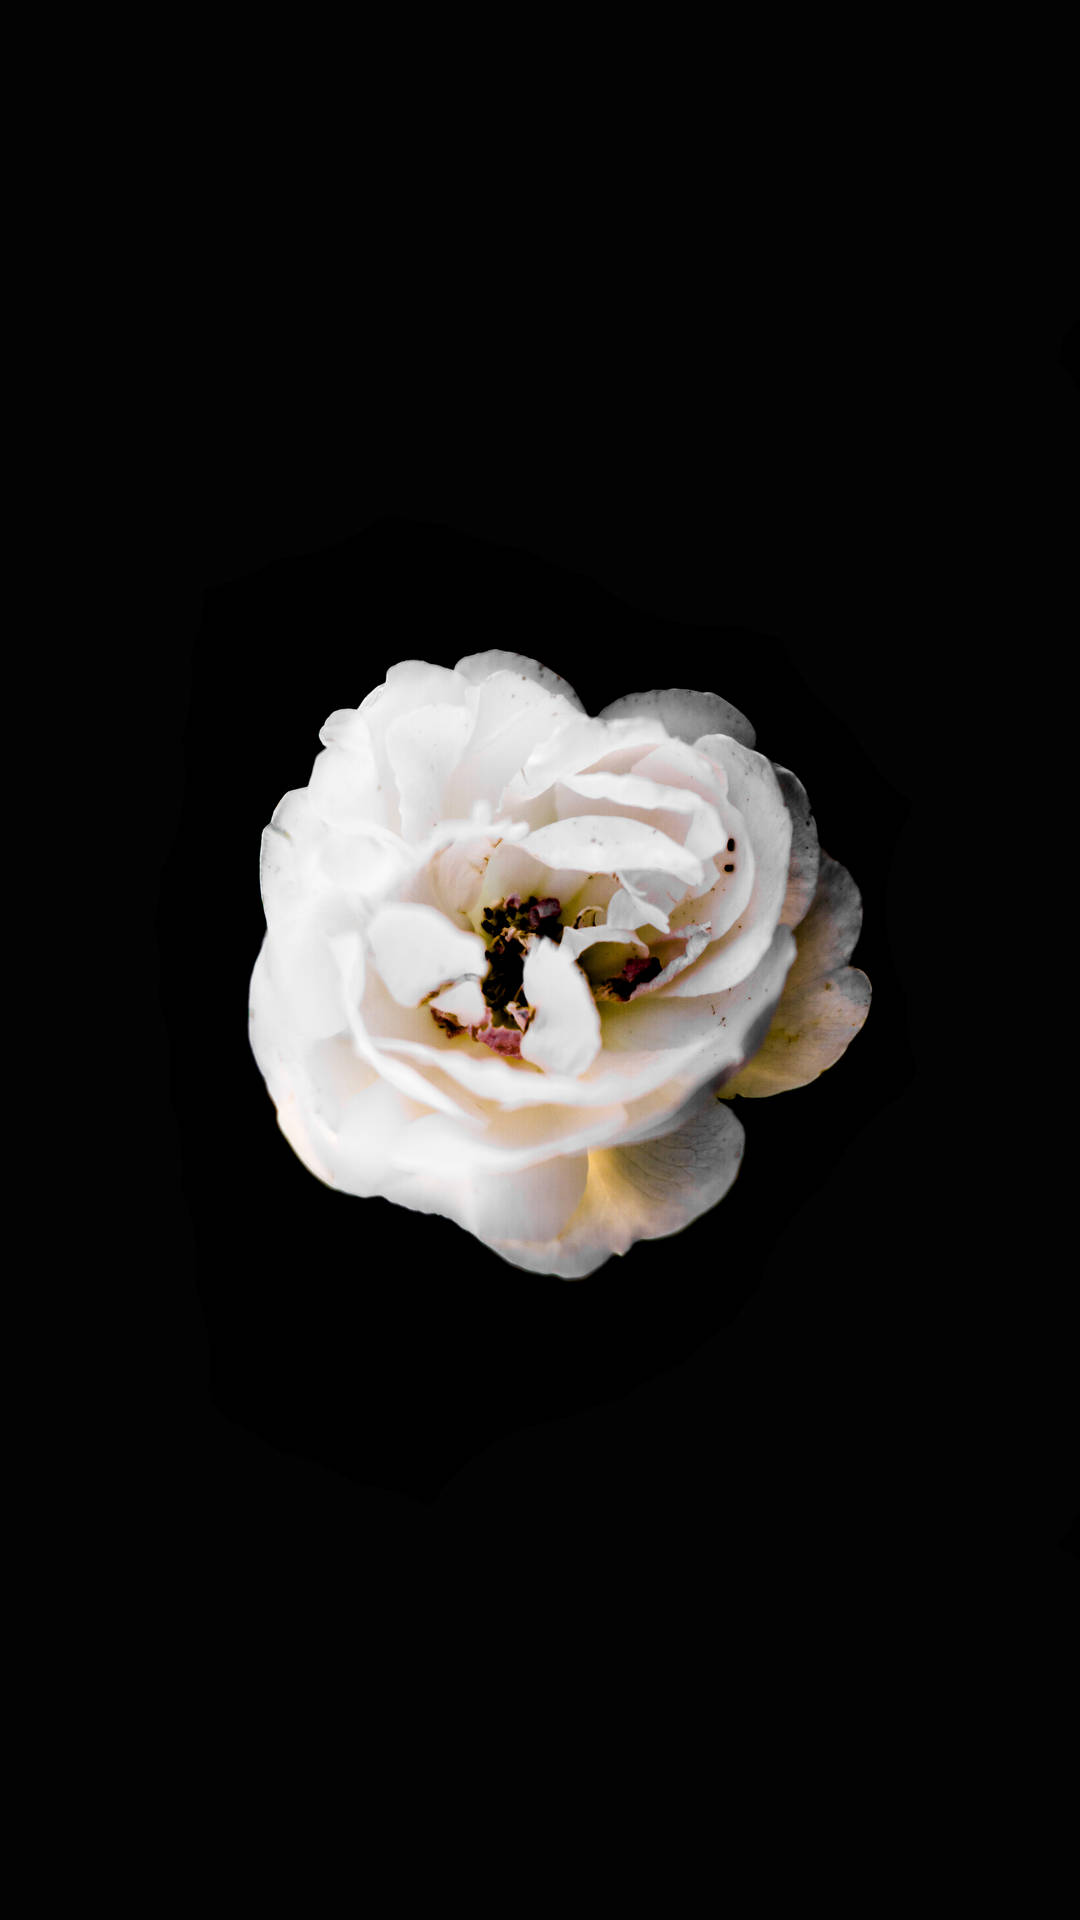 2180X3876 Black Rose Wallpaper and Background